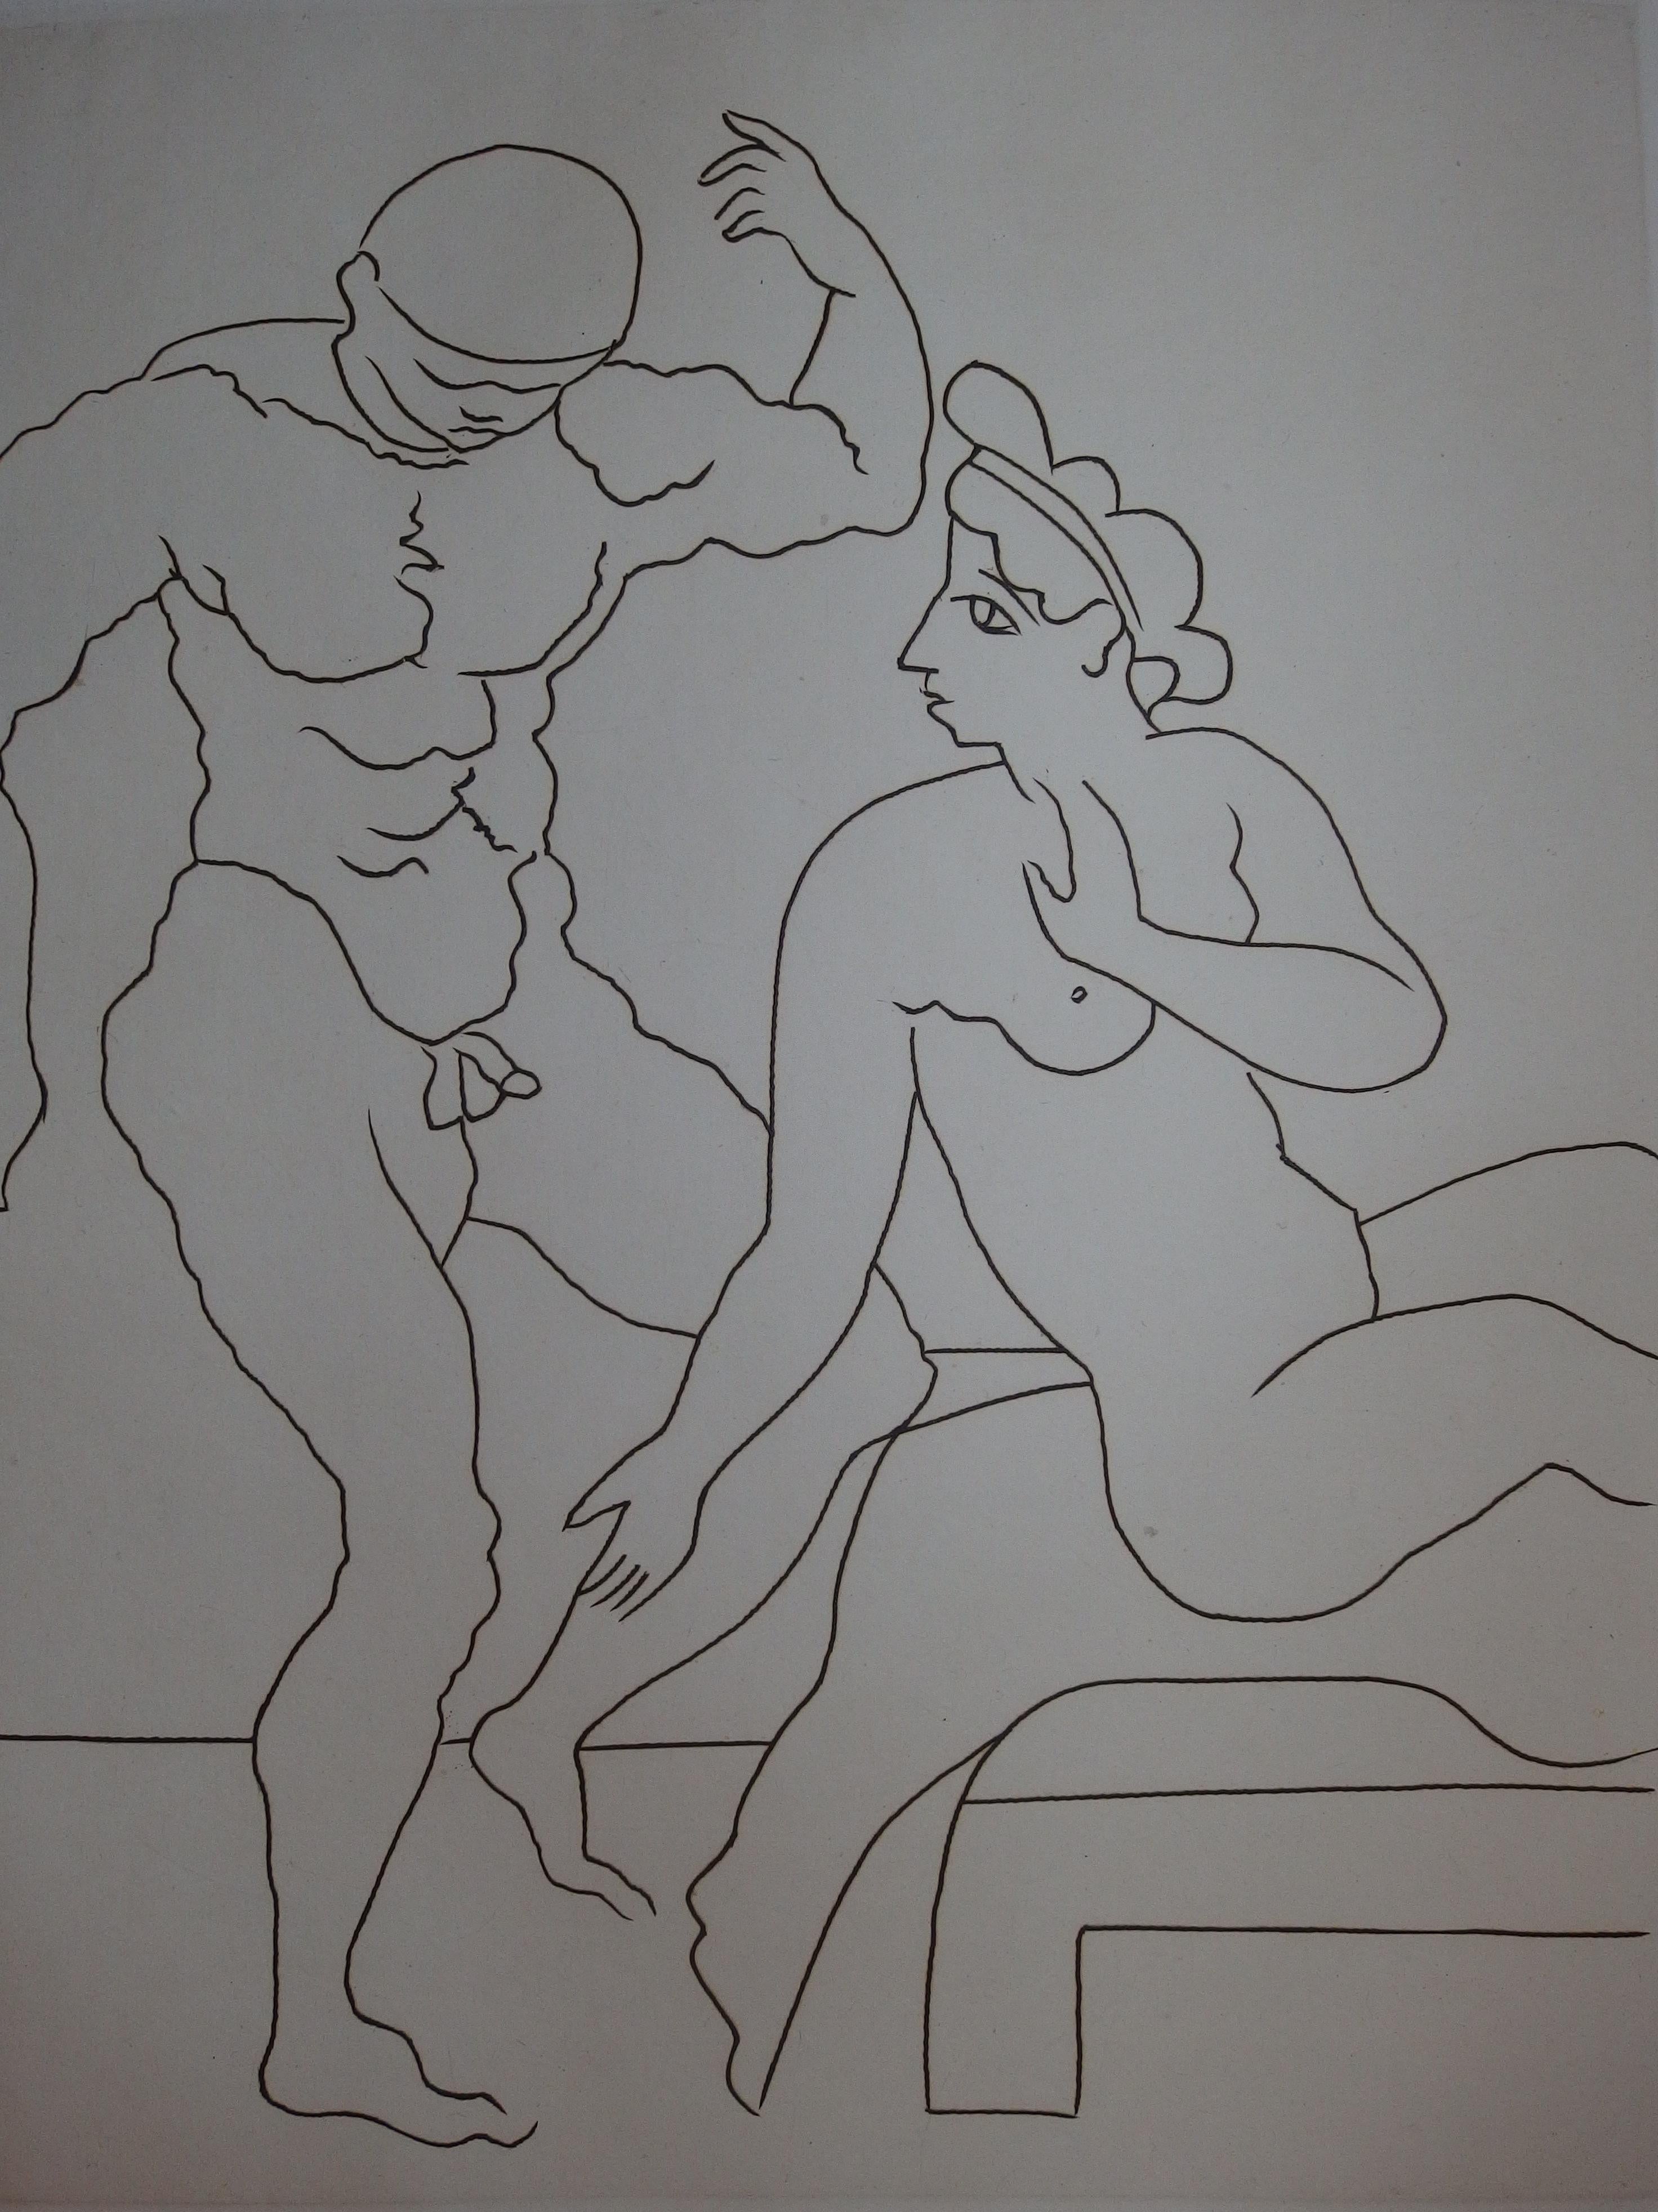 Athlete and Model - Original etching - 1951 - Print by André Derain